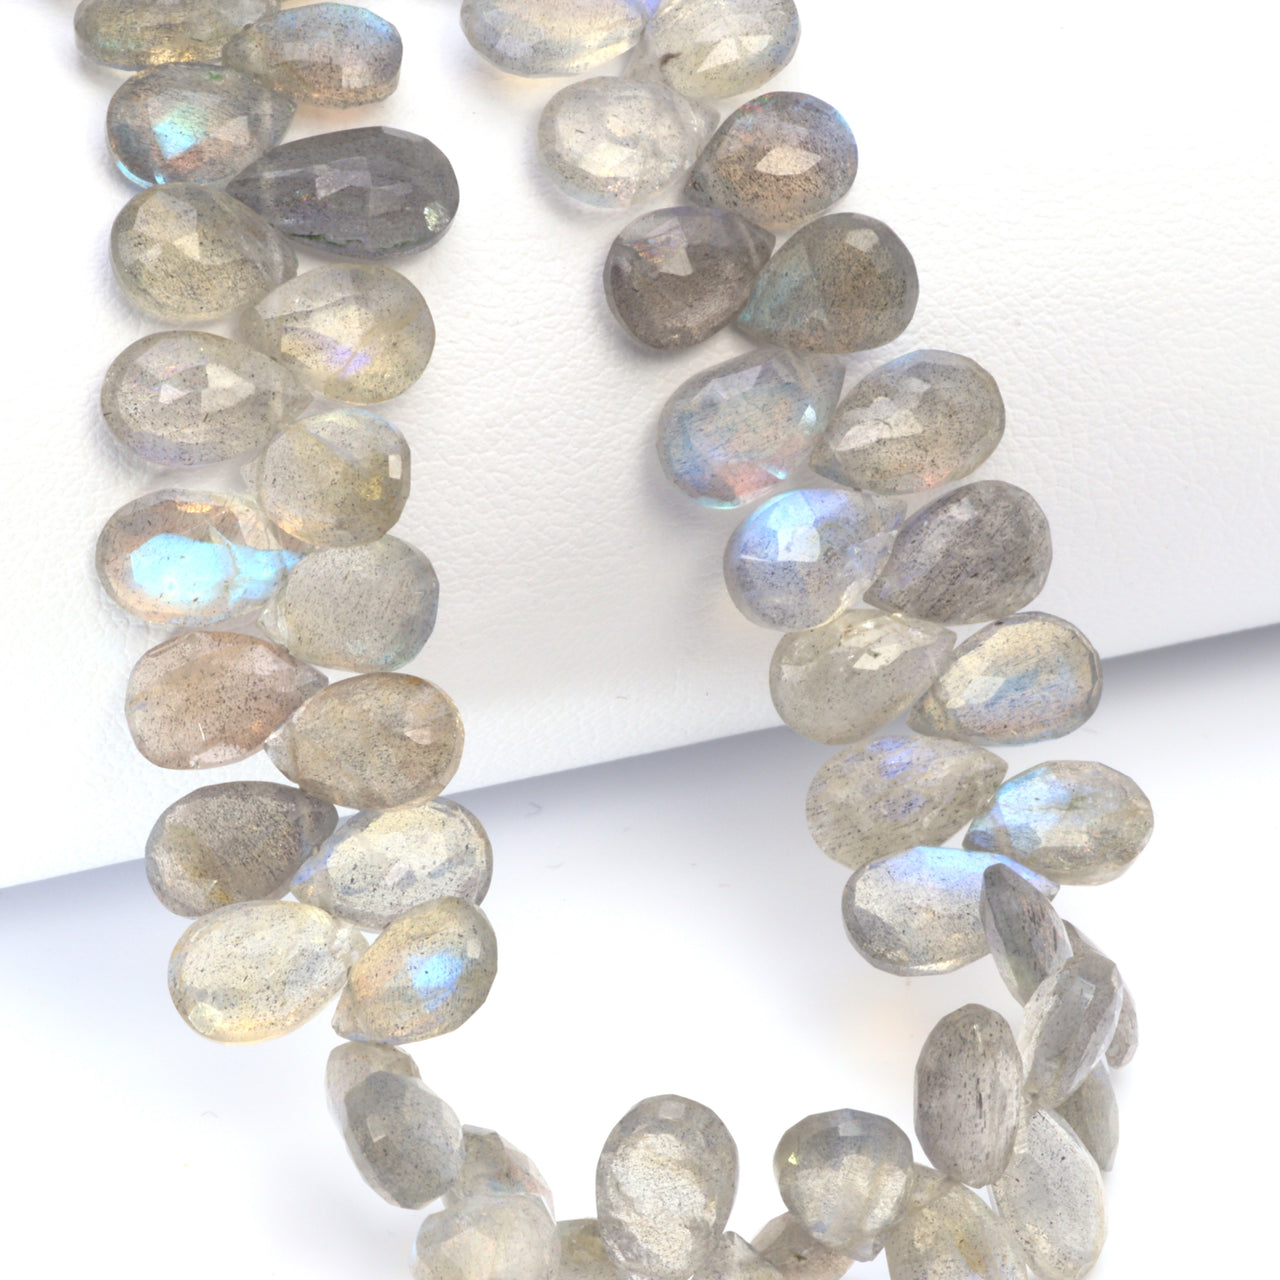 AA Blue Labradorite 6x8mm Faceted Pear Shaped Briolettes